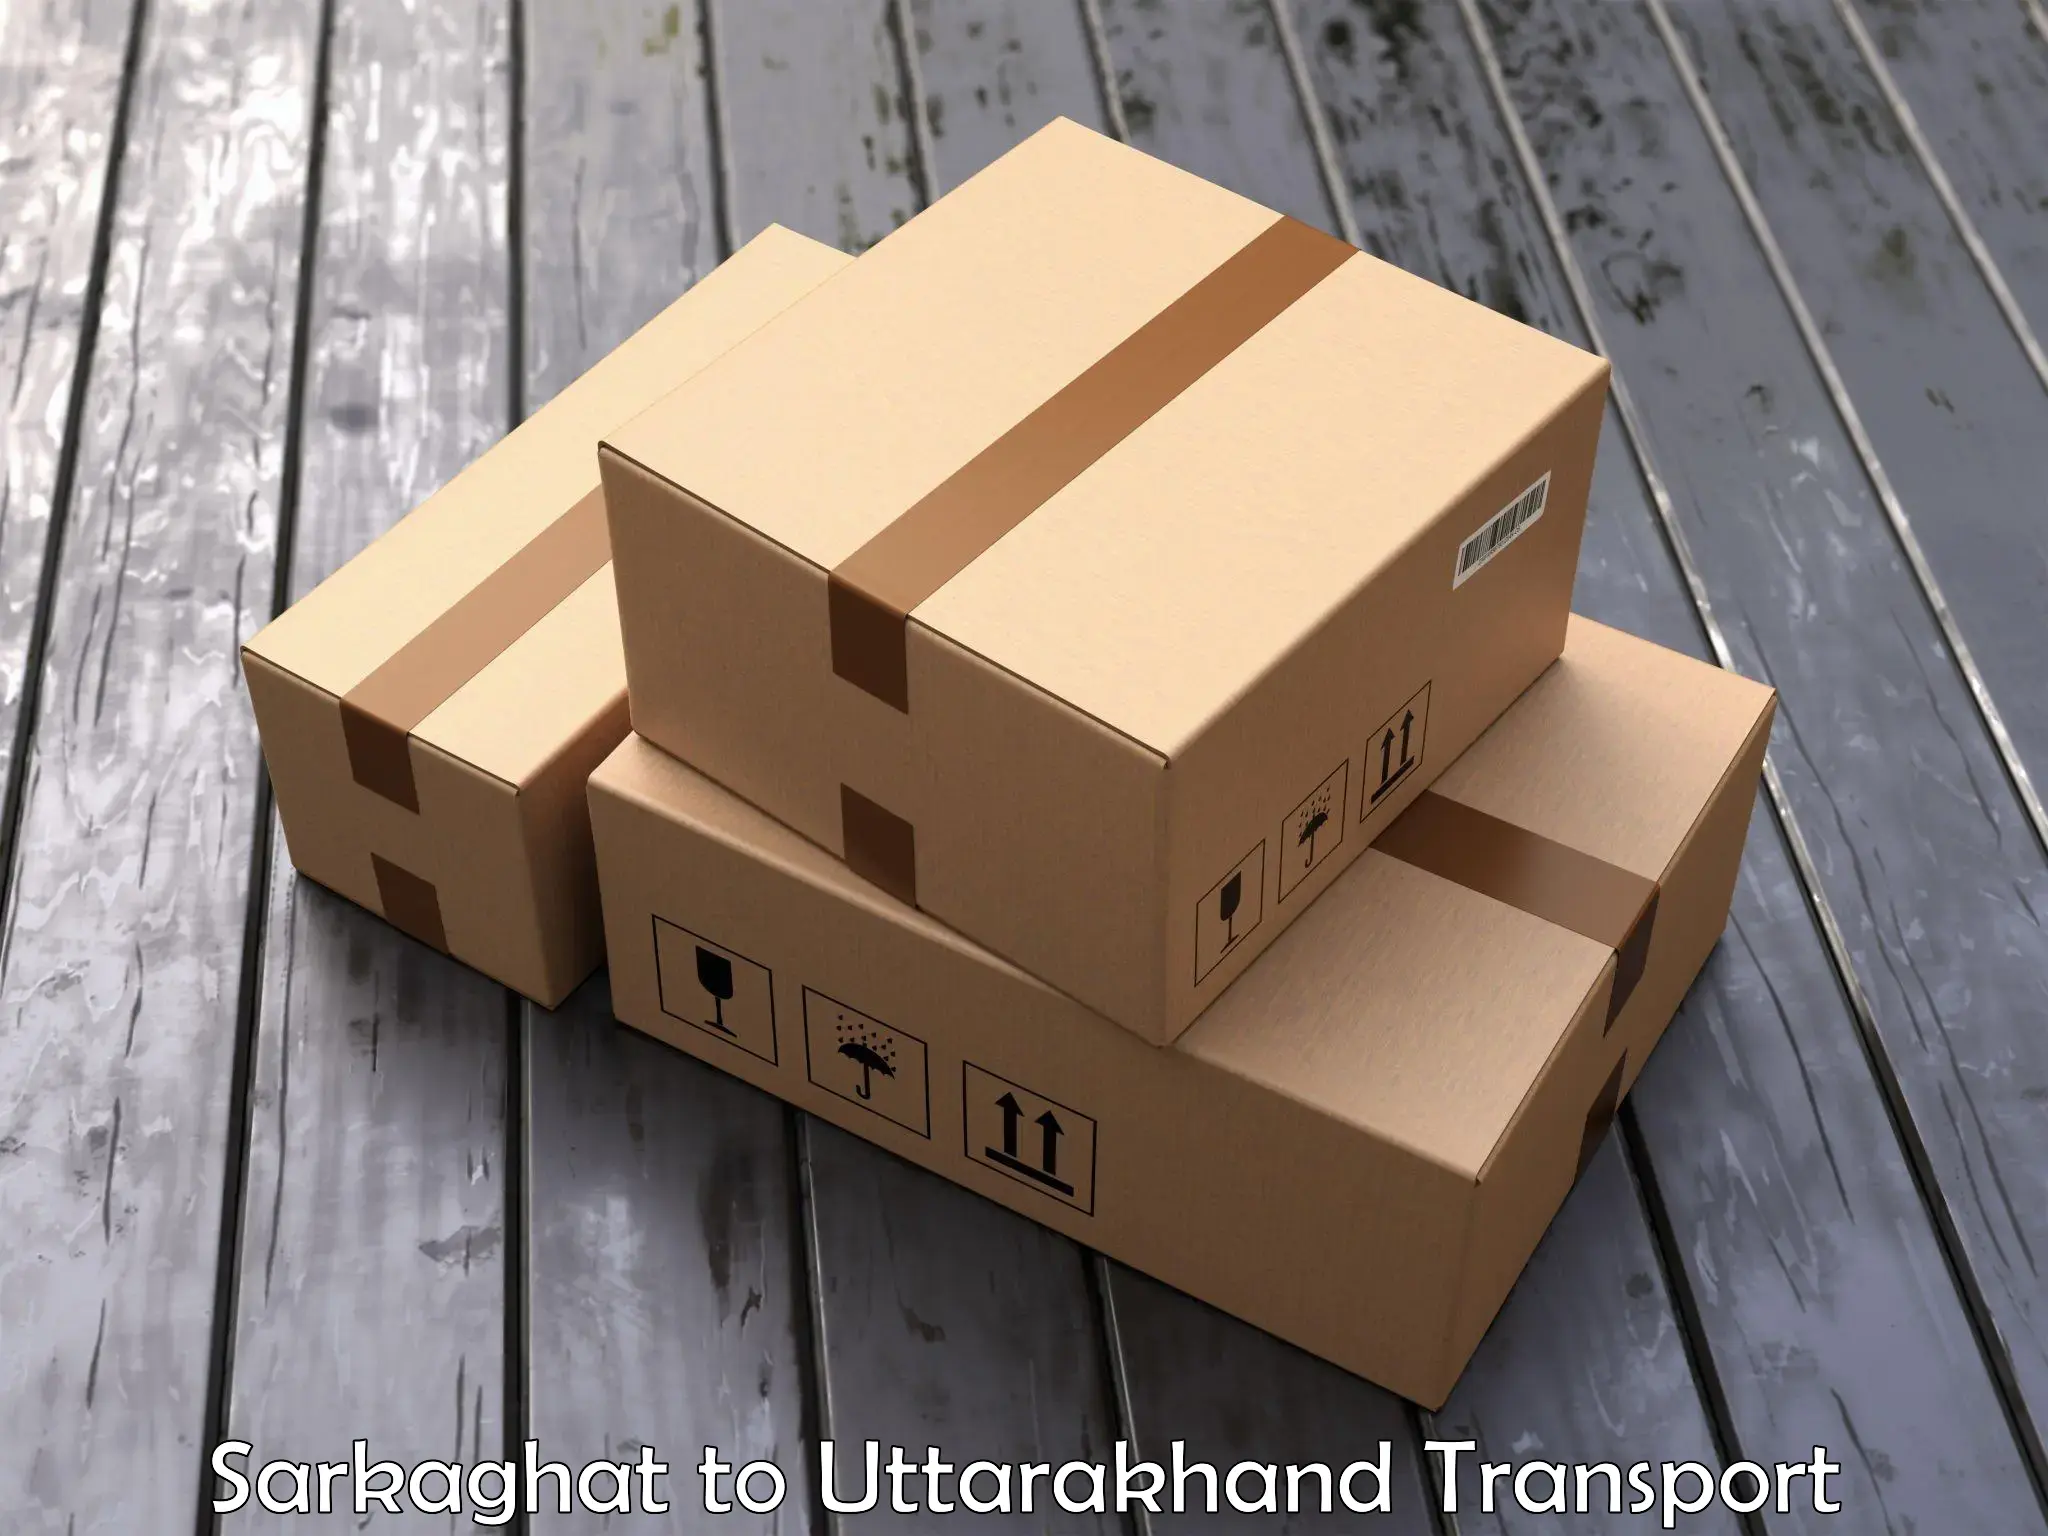 Air freight transport services Sarkaghat to Pithoragarh